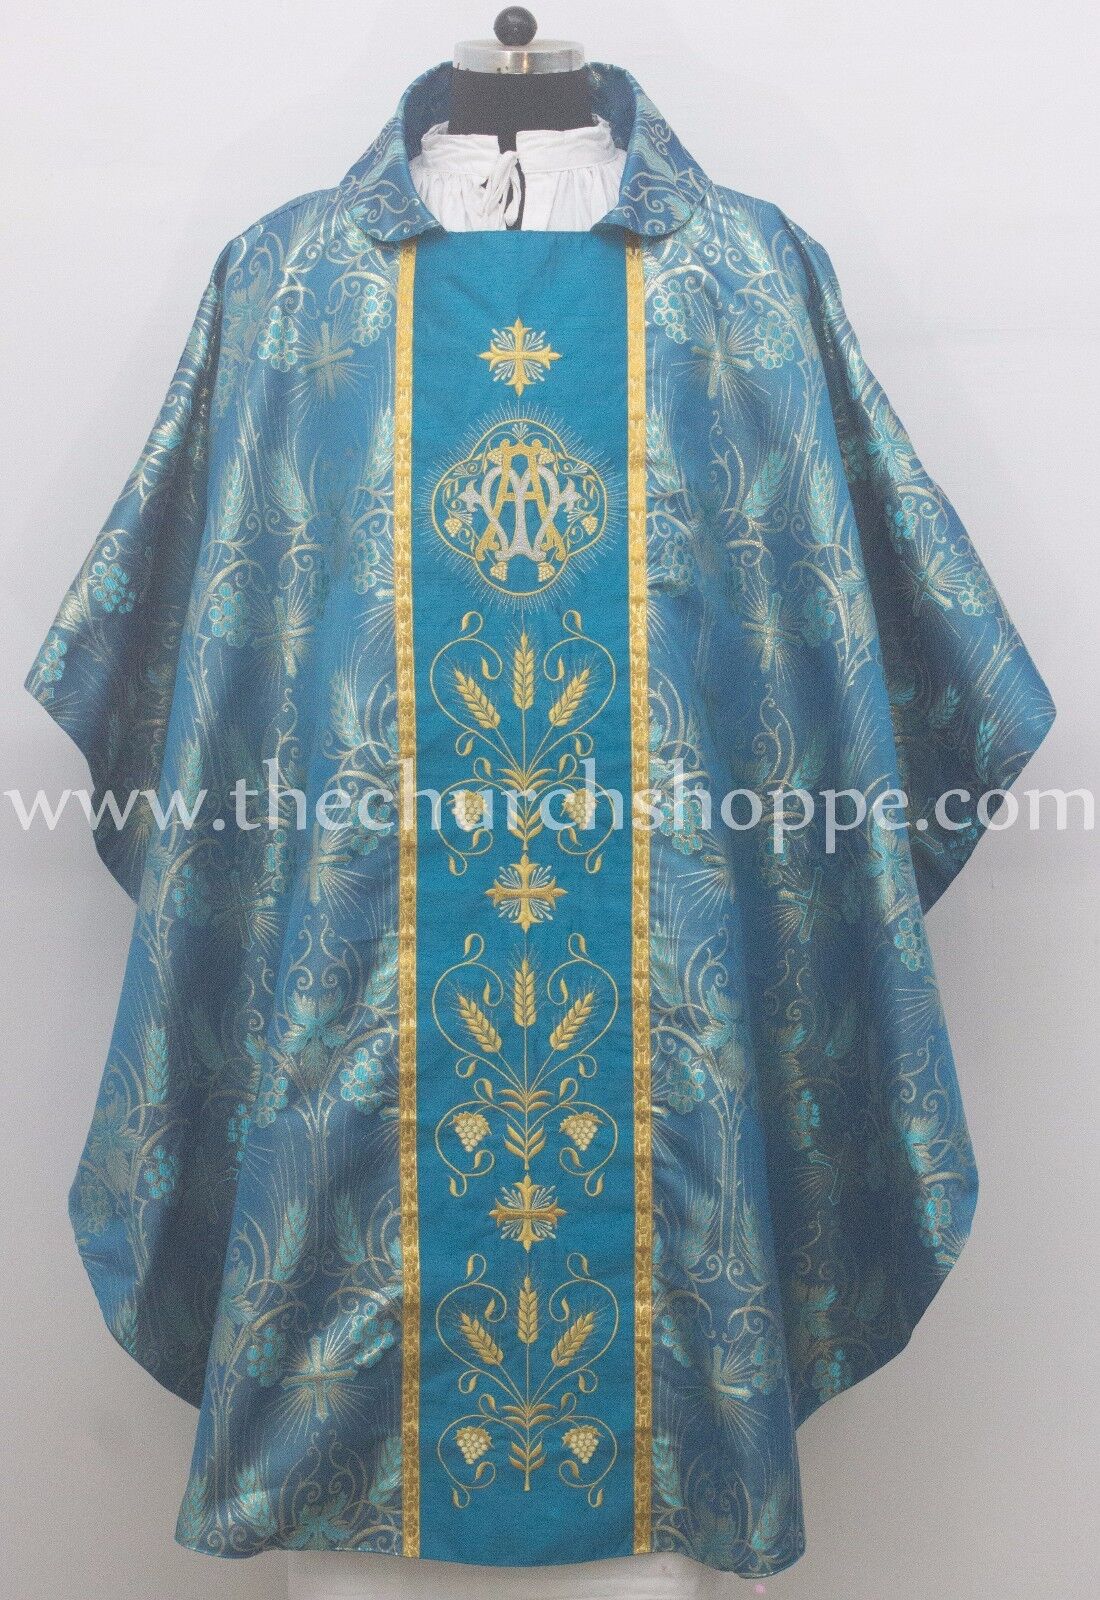 NEW METALLIC MARIAN BLUE Gothic Vestment & Stole set with AM Embroidery, Casula,